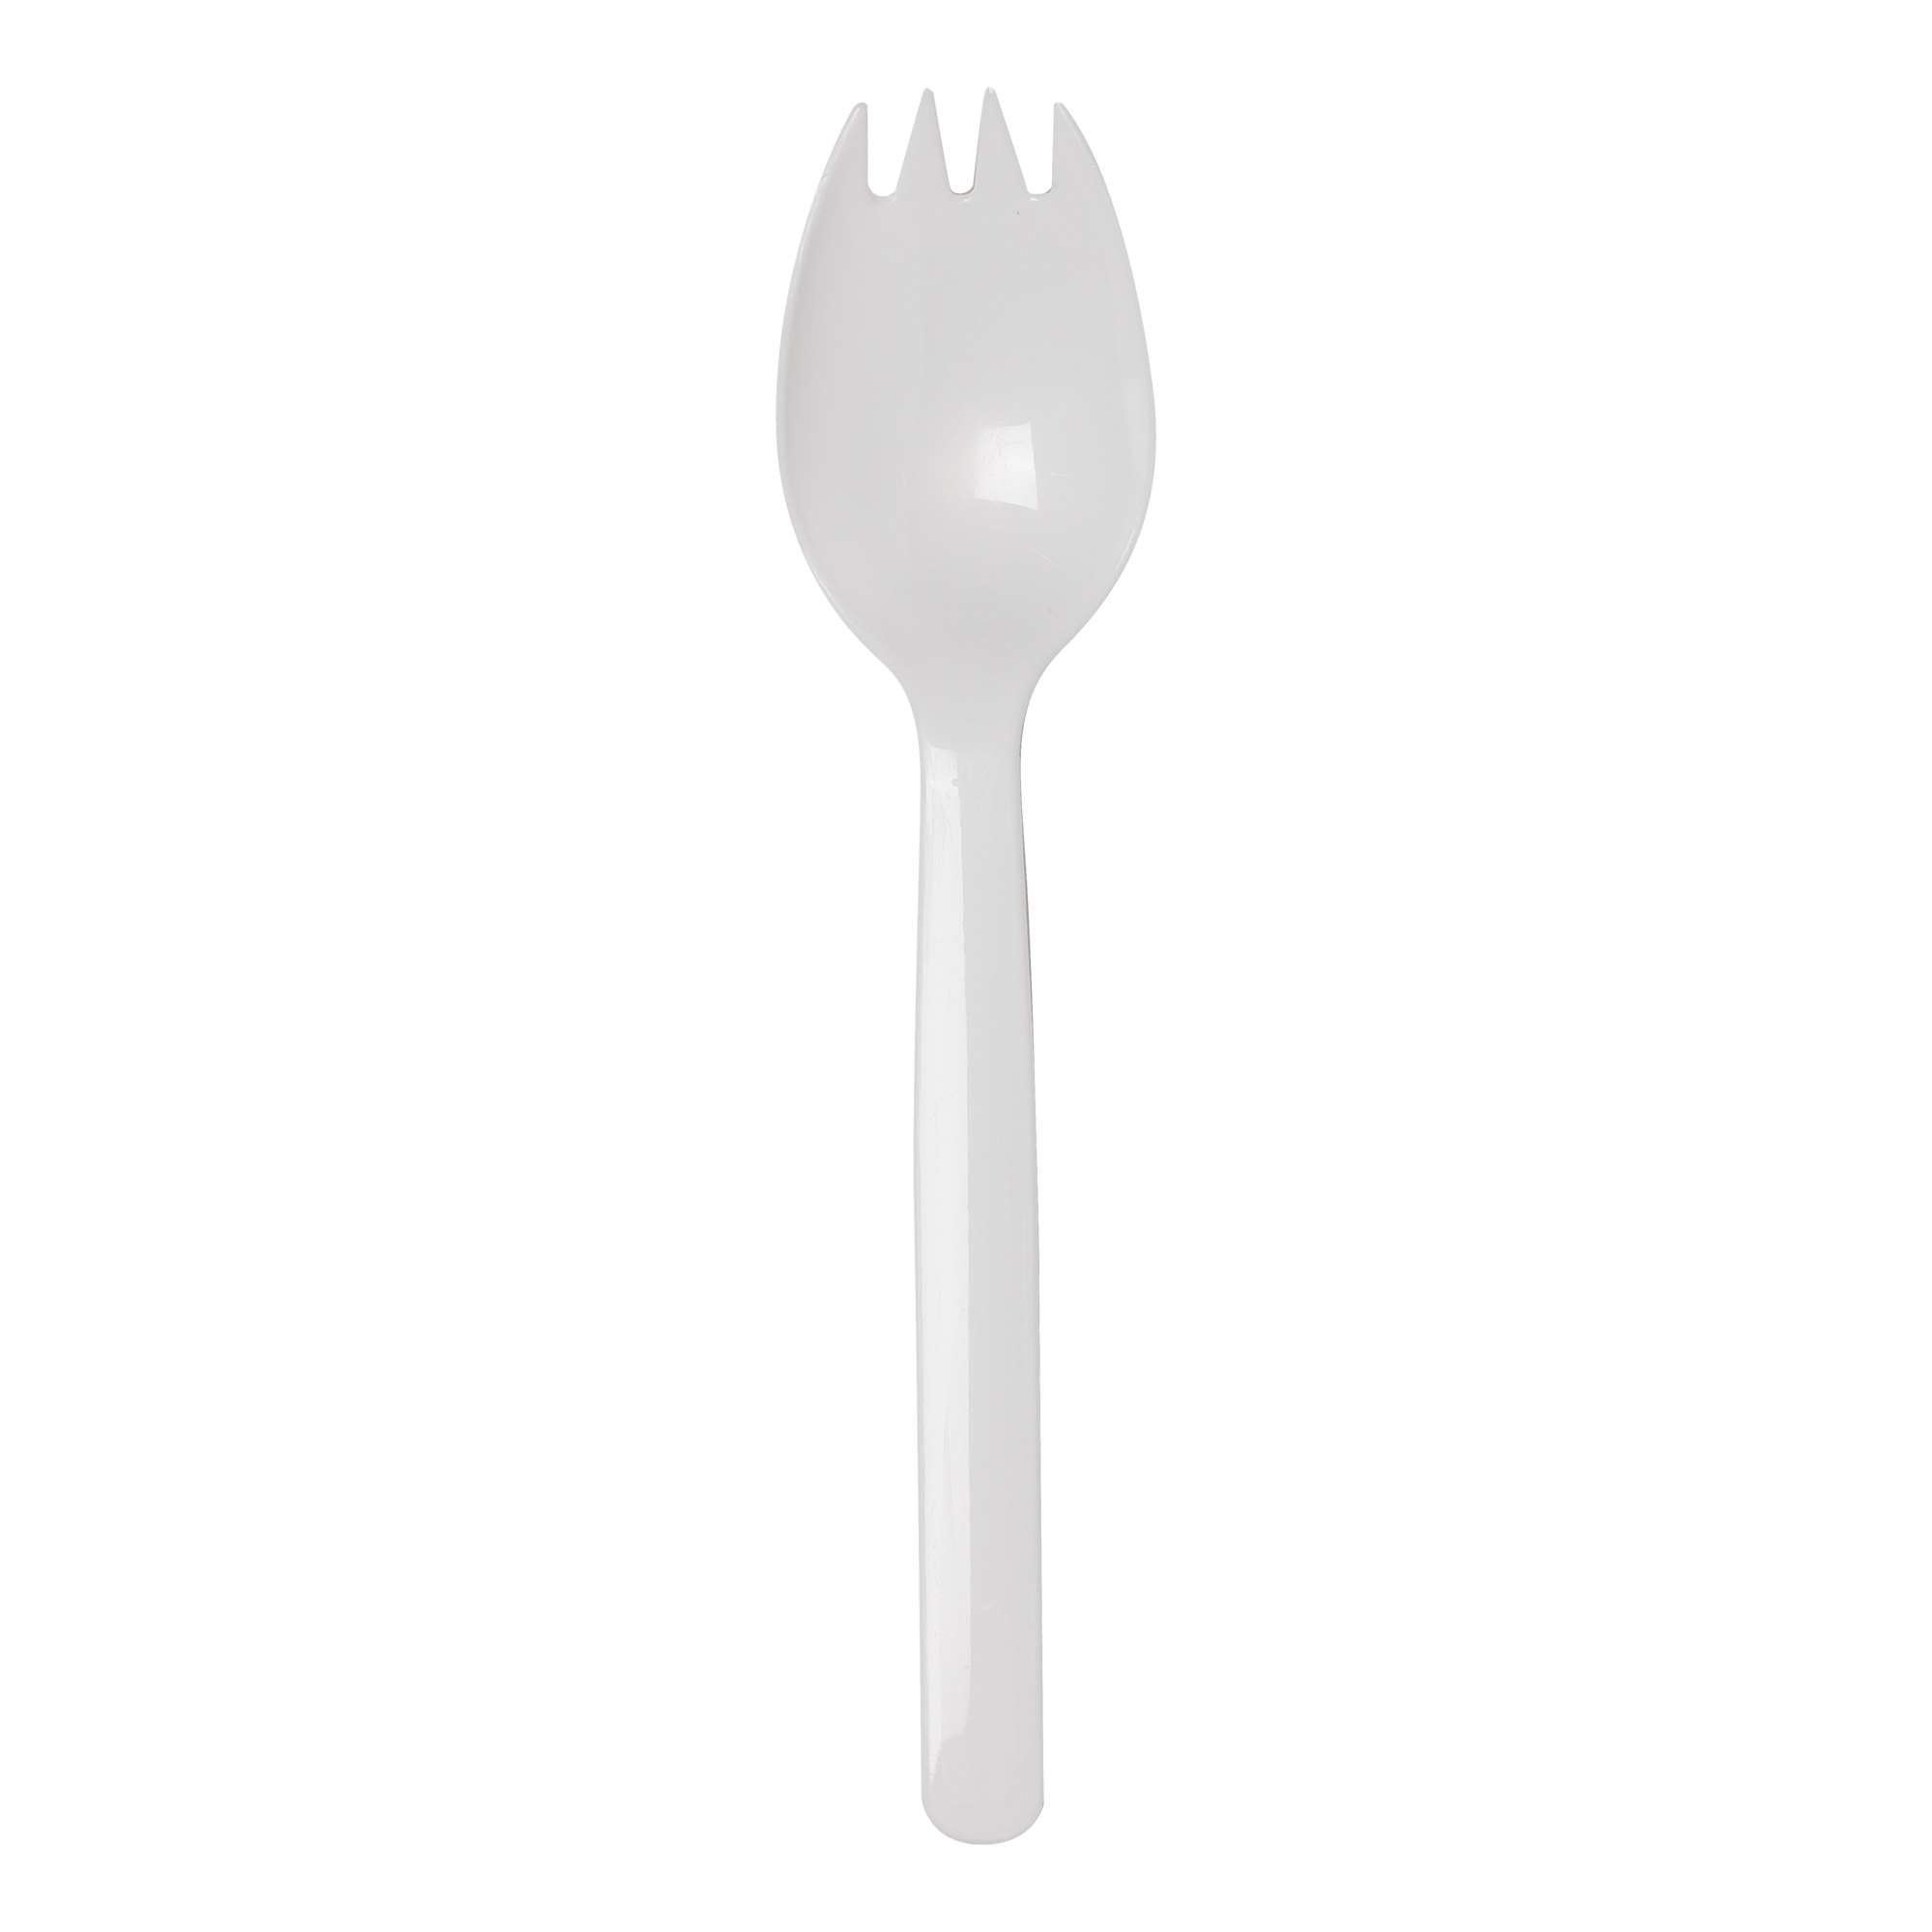 Medium Weight Sporks Wrapped 1000ct thumbnail